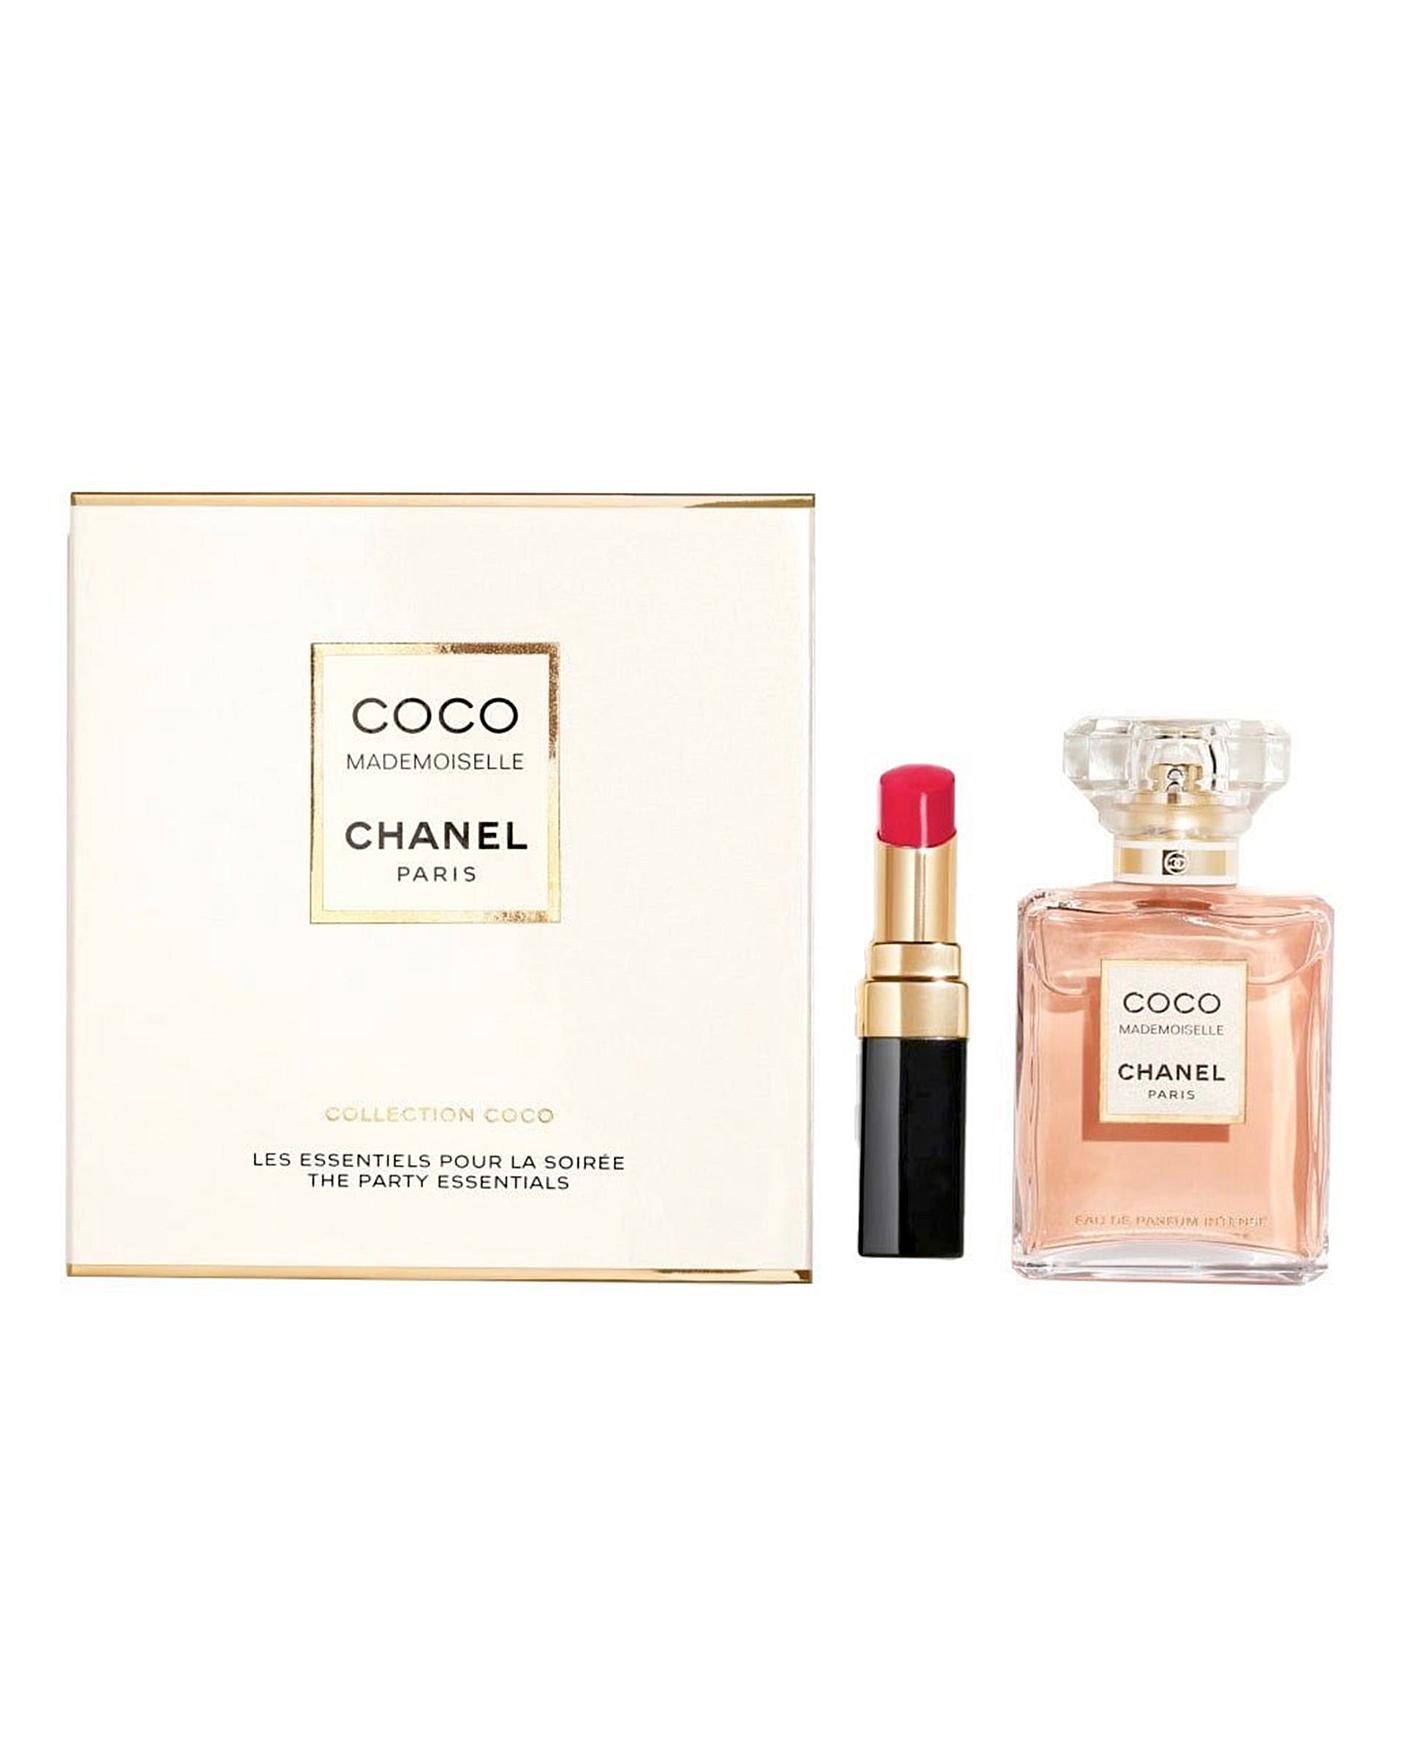 Chanel Coco Mademoiselle Gift Set J D Williams